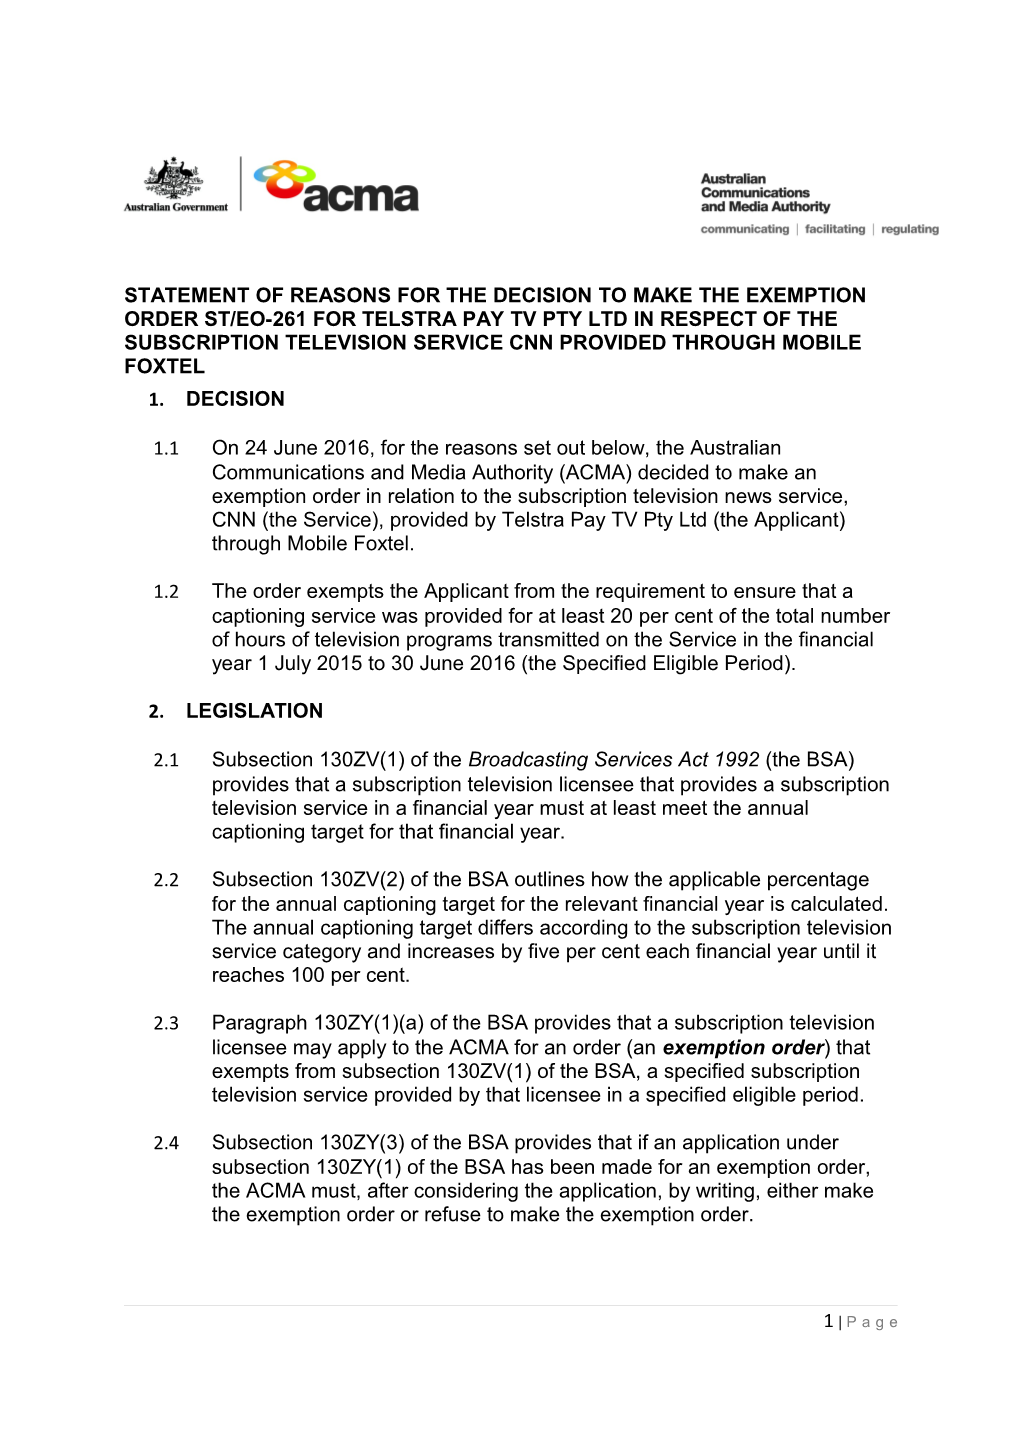 Statement of Reasons for the Decision to Make the Exemption Order St/Eo-261For Telstra